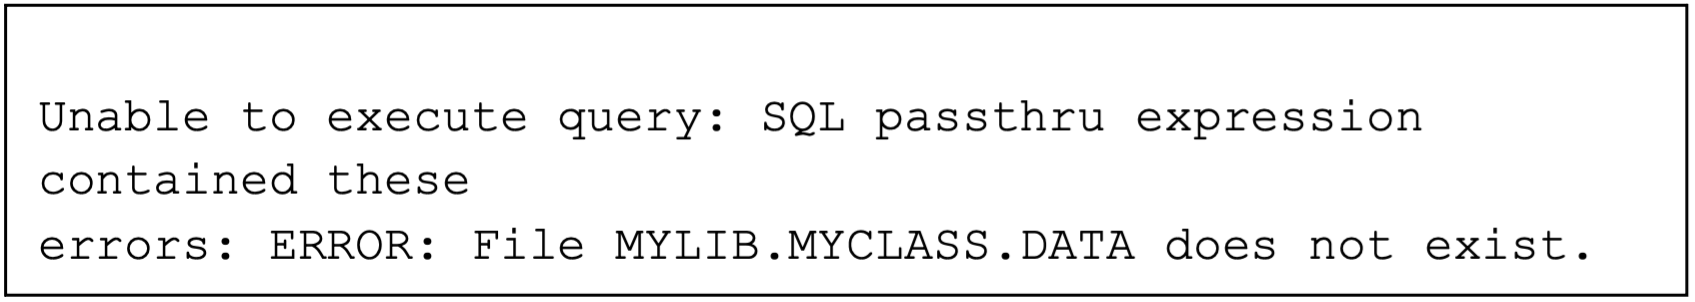 Unable to execute query: SQL passthru expression contained these errors: ERROR: File MYLIB.MYCLASS.DATA does not exist